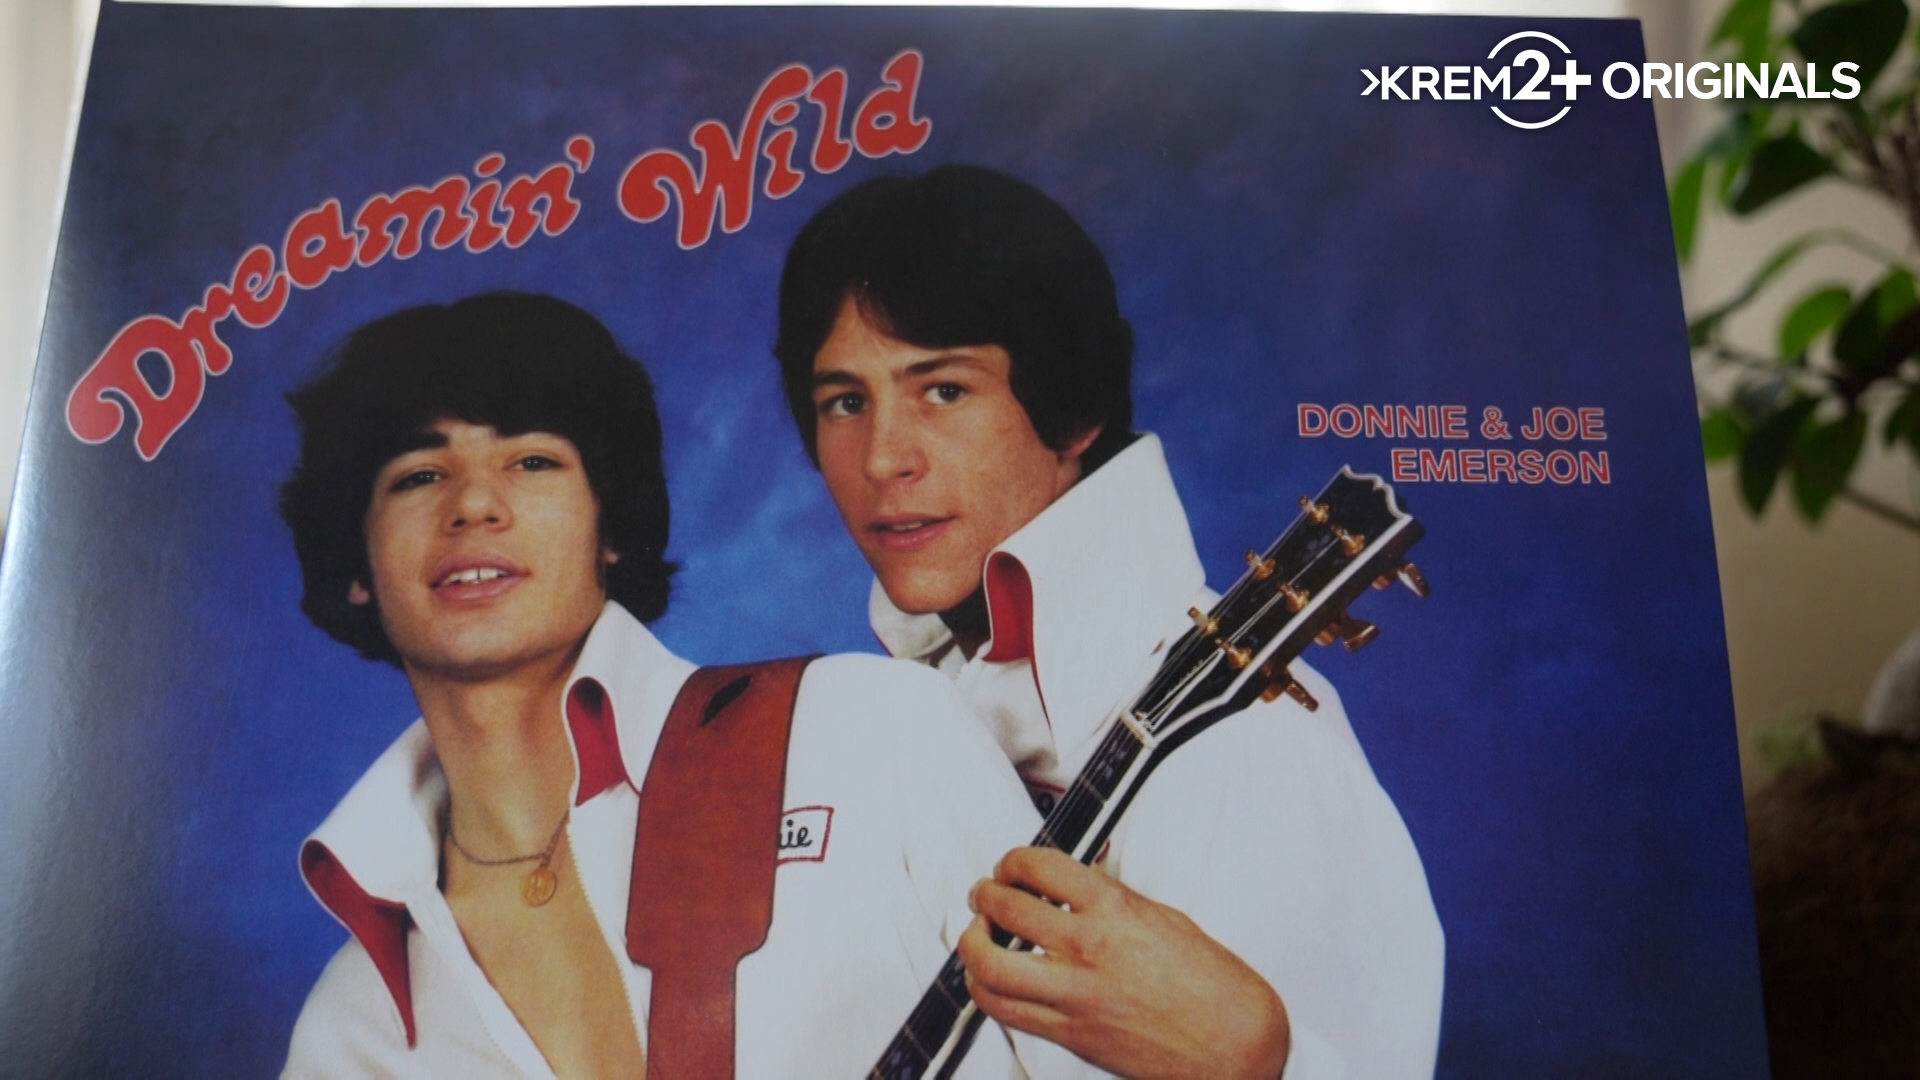 Donnie and Joe Emerson had a dream of making music from their family farm in Fruitland, Washington. They cut one album and it became a hit... 30 years later.